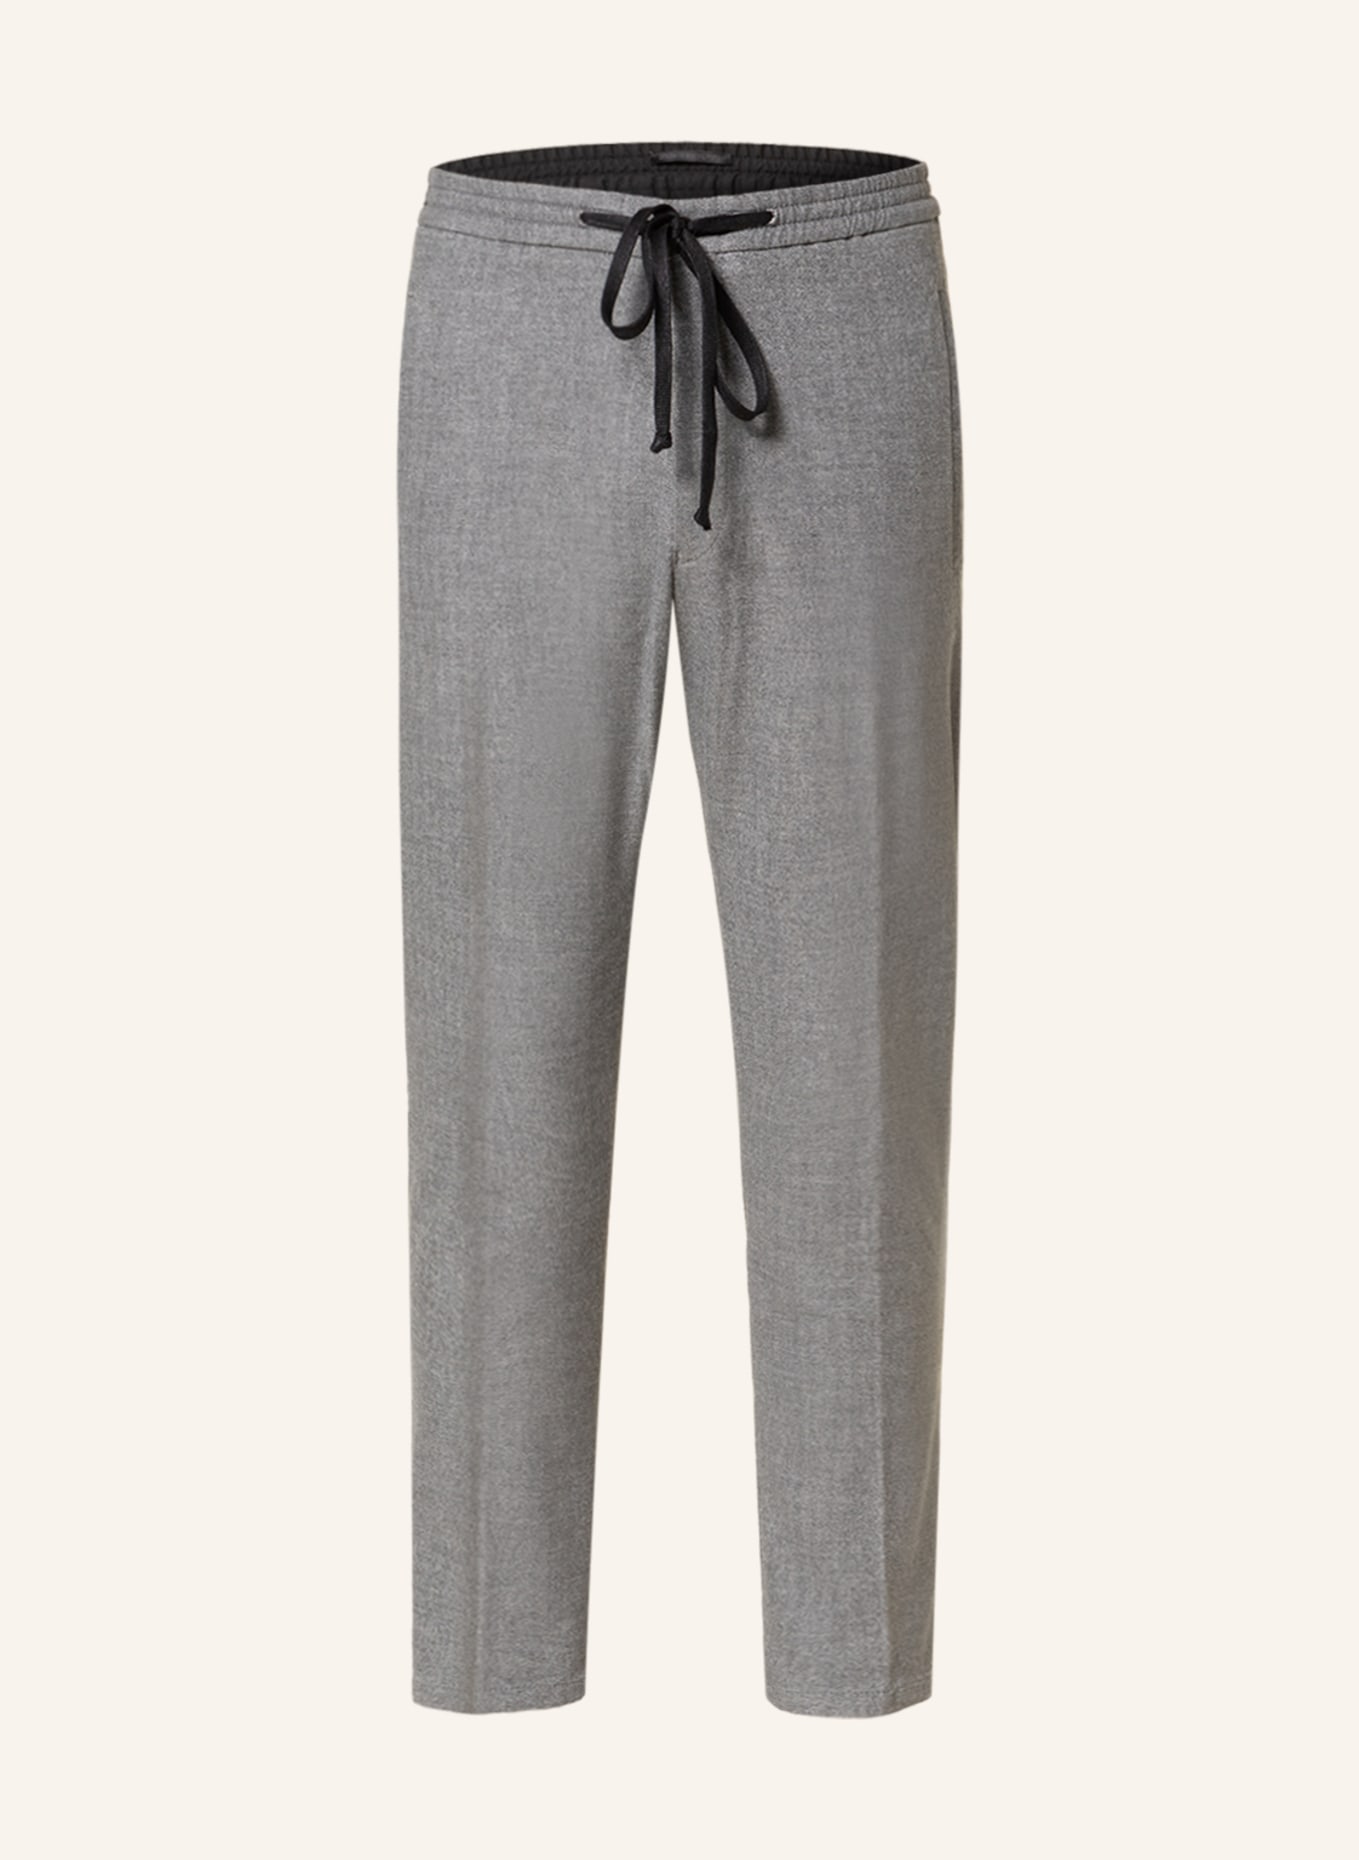 DRYKORN Pants JEGER in jogger style in gray